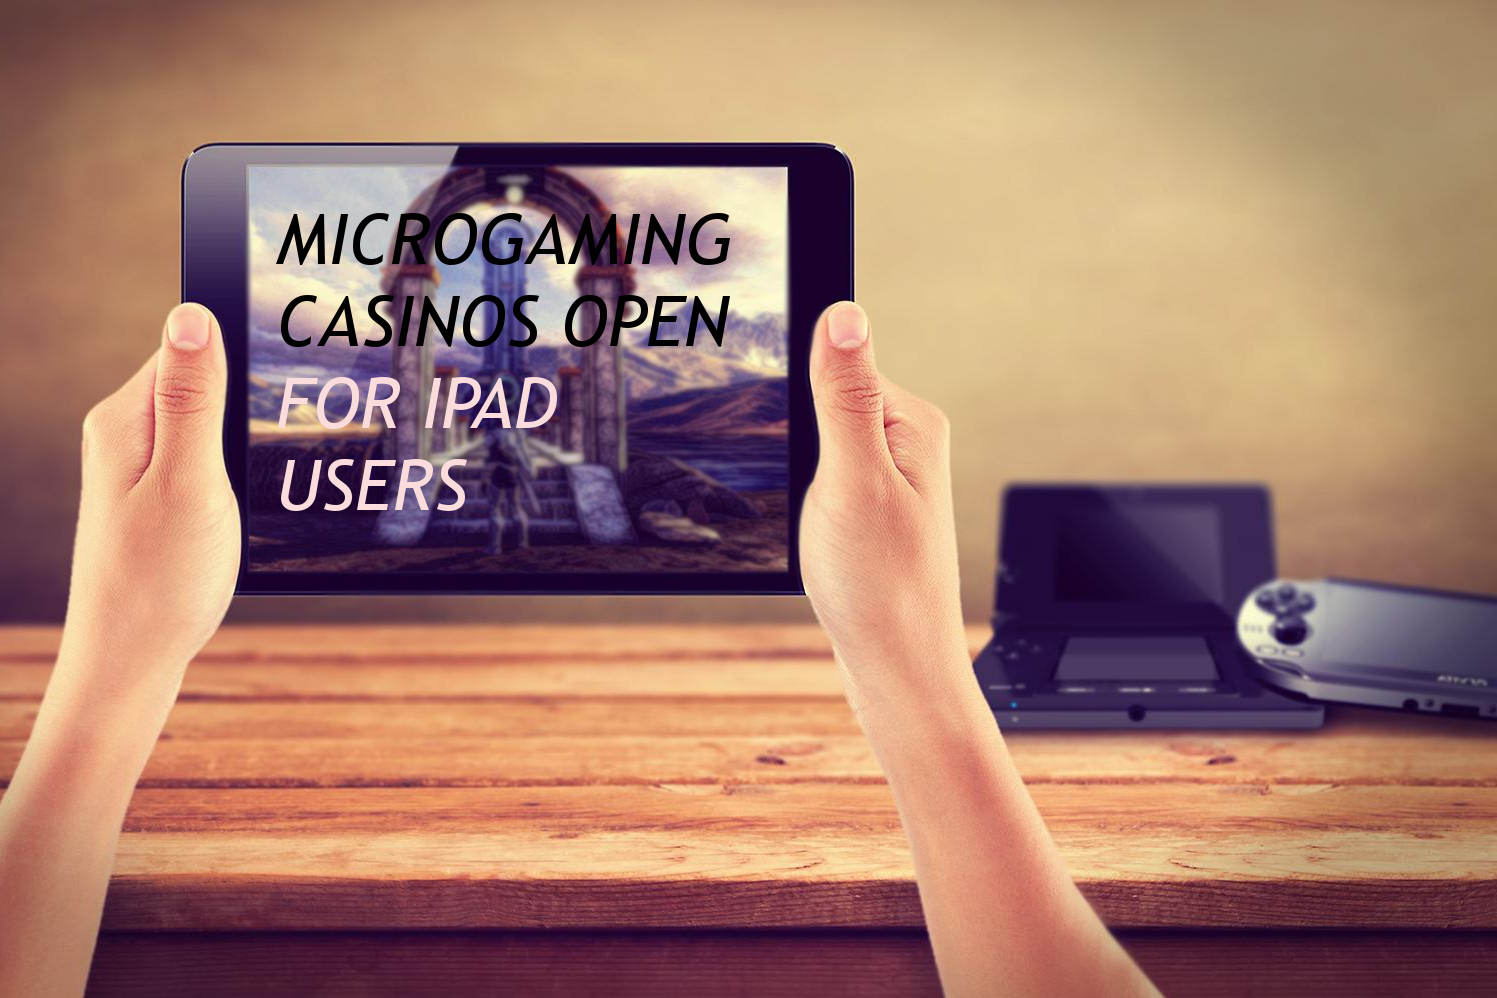 iPad Microgaming Casinos Experince for Cash